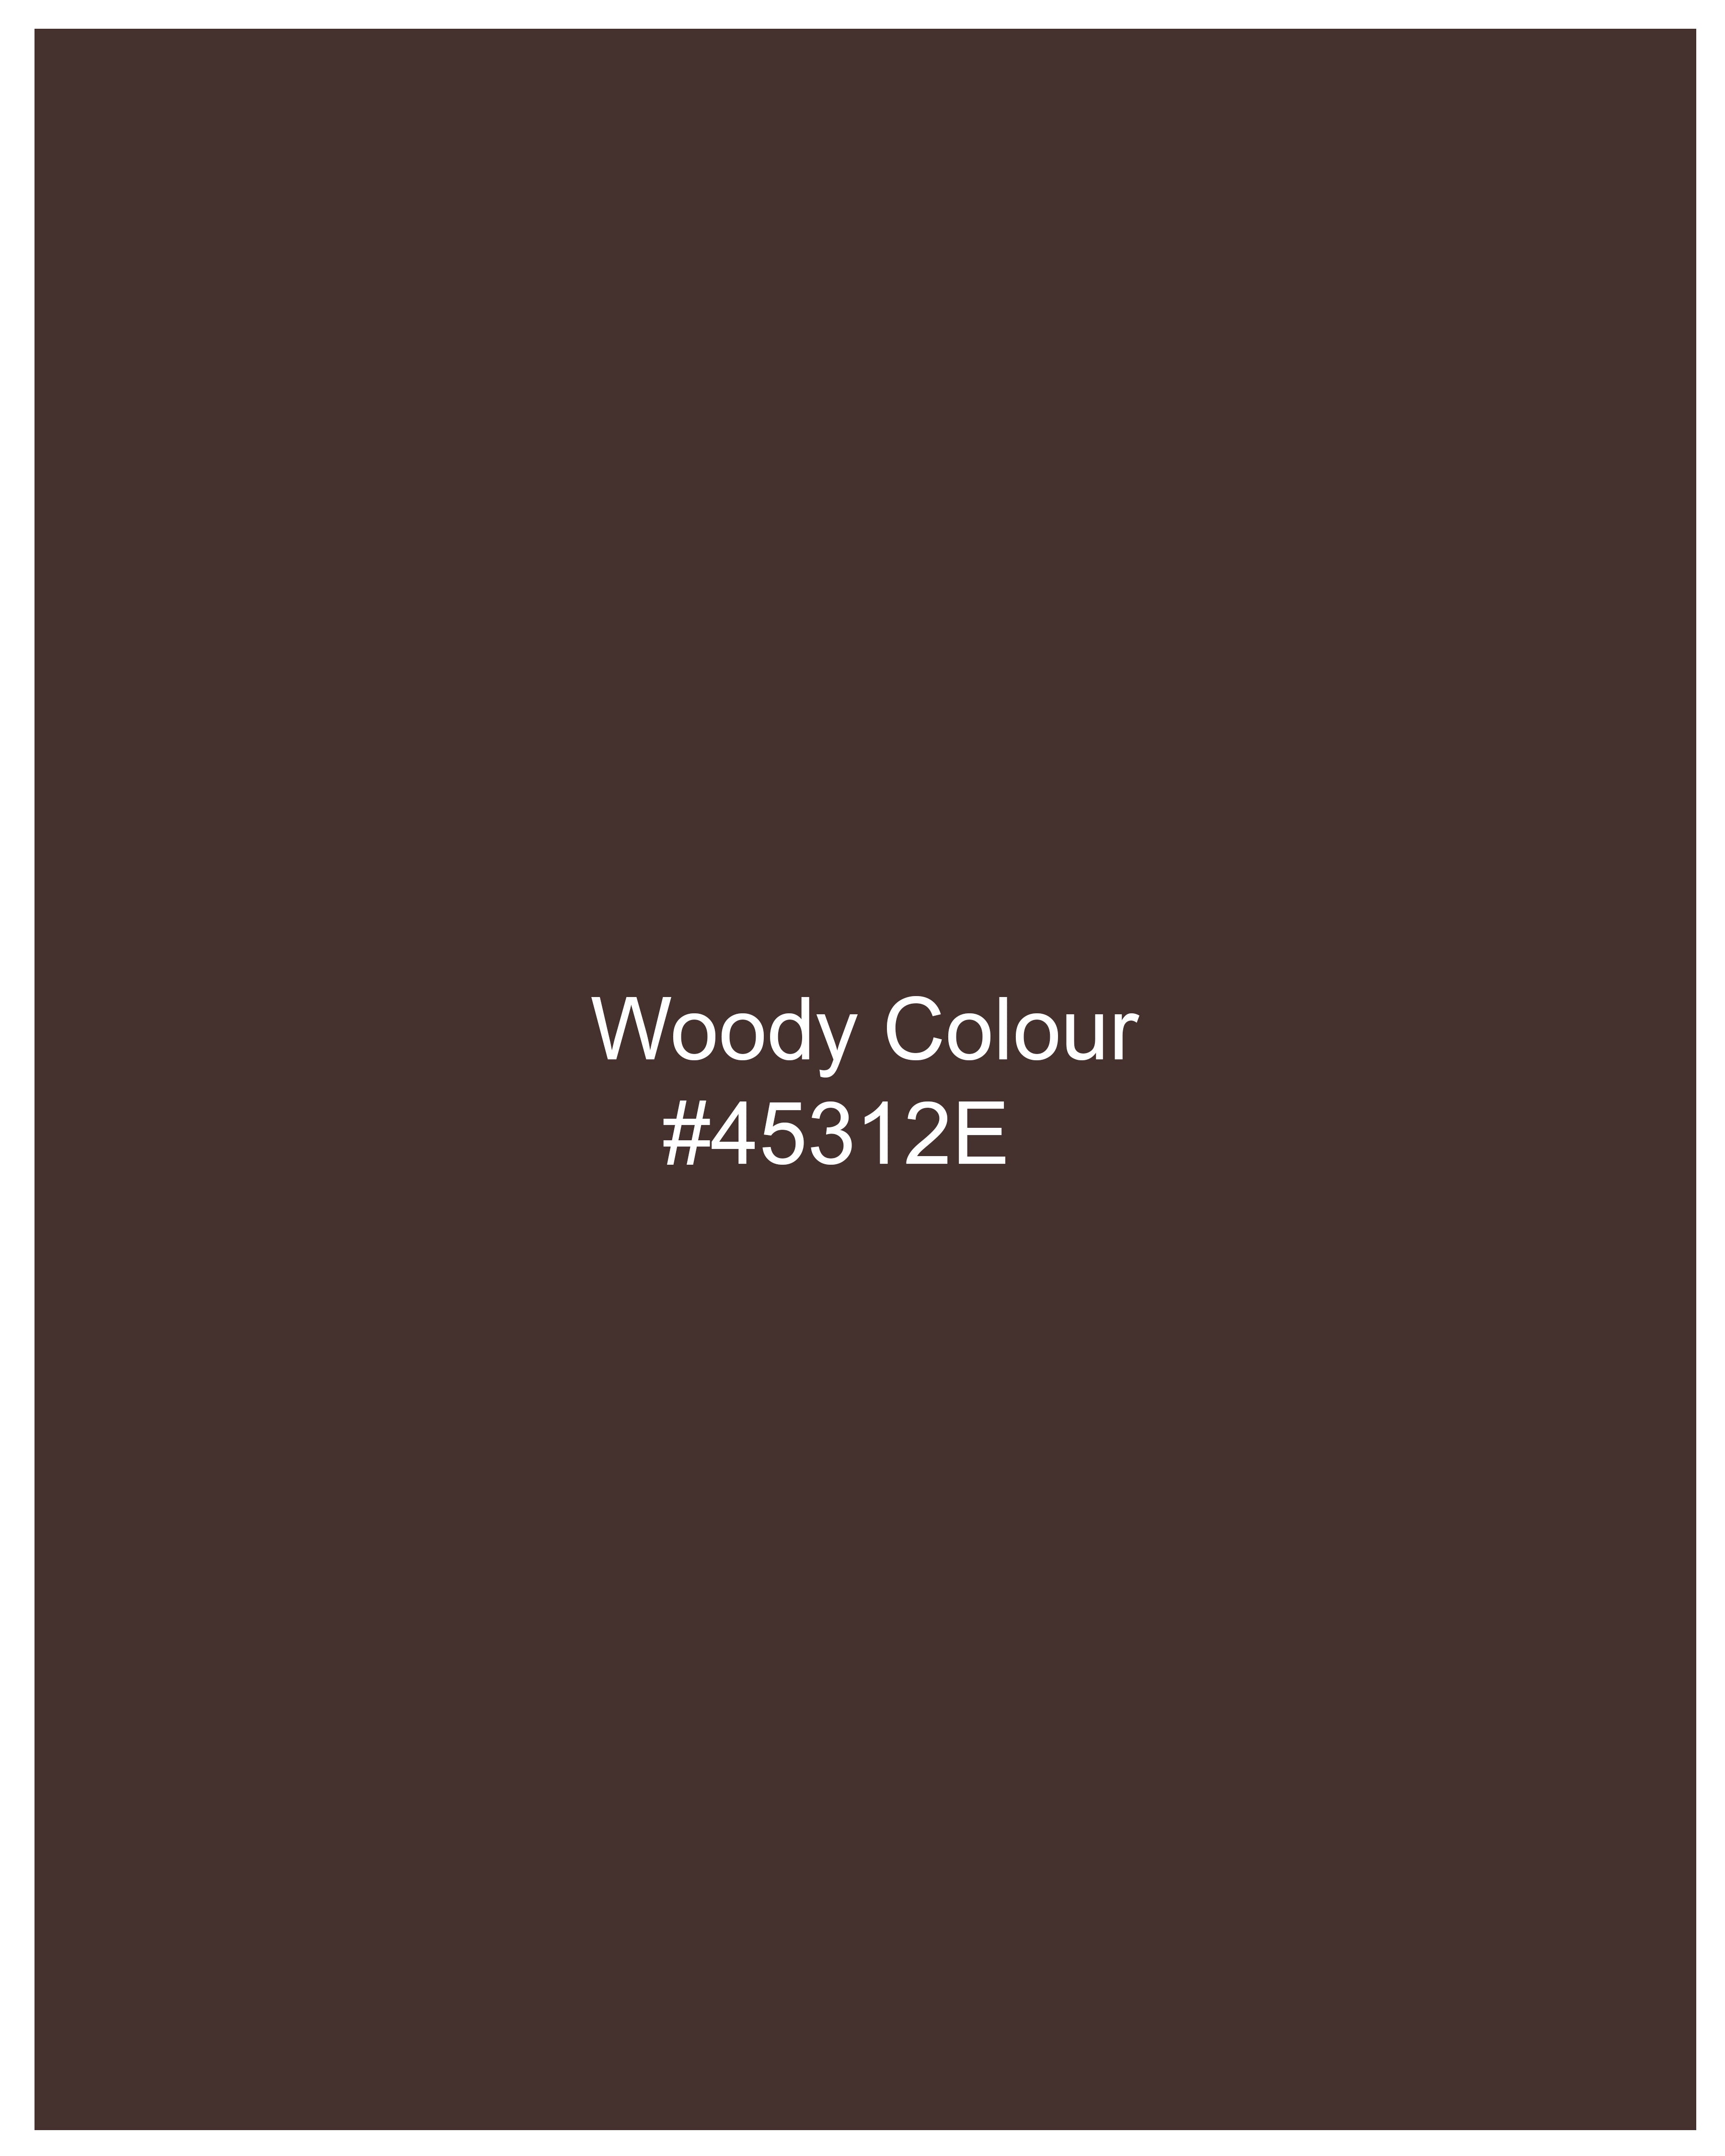 Woody Brown Embroidered Super Soft Premium Cotton Shirt  9711-CB-38, 9711-CB-H-38, 9711-CB-39, 9711-CB-H-39, 9711-CB-40, 9711-CB-H-40, 9711-CB-42, 9711-CB-H-42, 9711-CB-44, 9711-CB-H-44, 9711-CB-46, 9711-CB-H-46, 9711-CB-48, 9711-CB-H-48, 9711-CB-50, 9711-CB-H-50, 9711-CB-52, 9711-CB-H-52